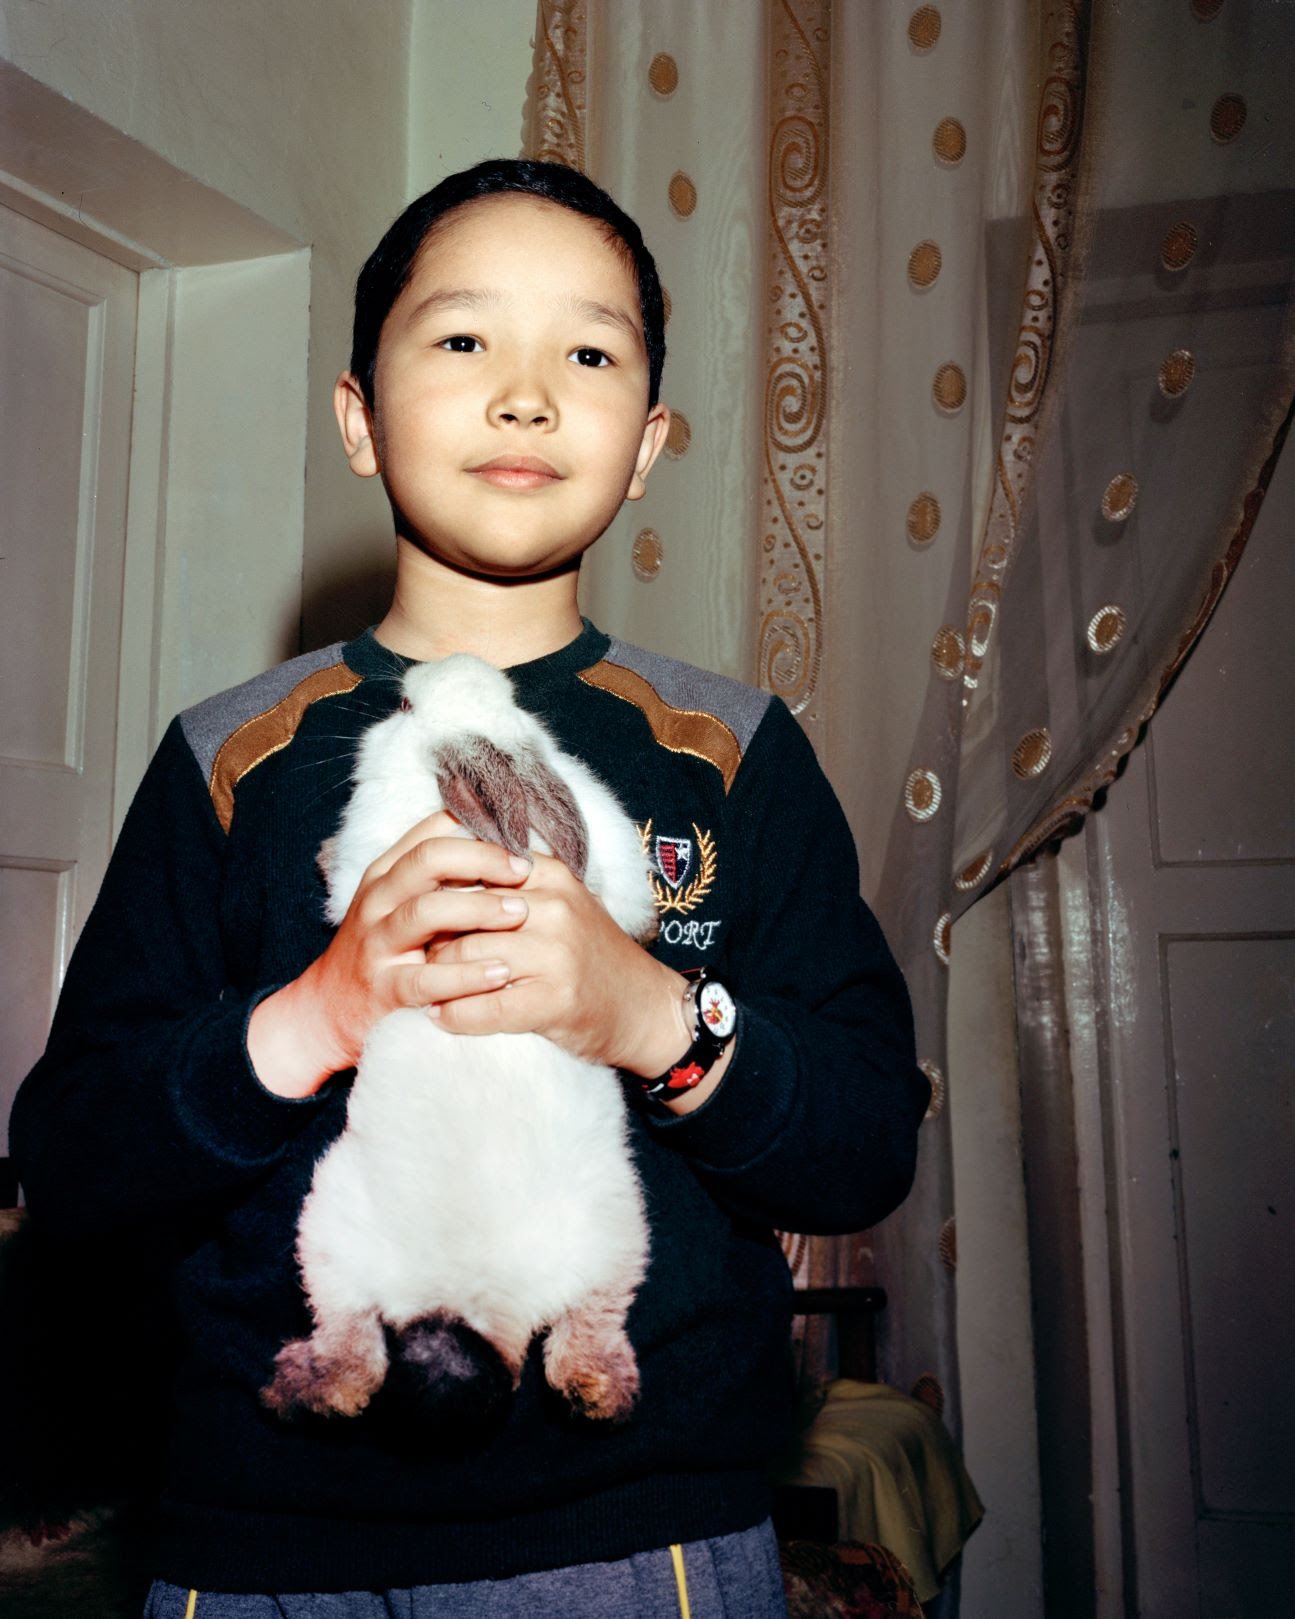 [IMAGE[ Photograph showing a young boy, stood inside a living room, holding up a white pet rabbit up to the camera.